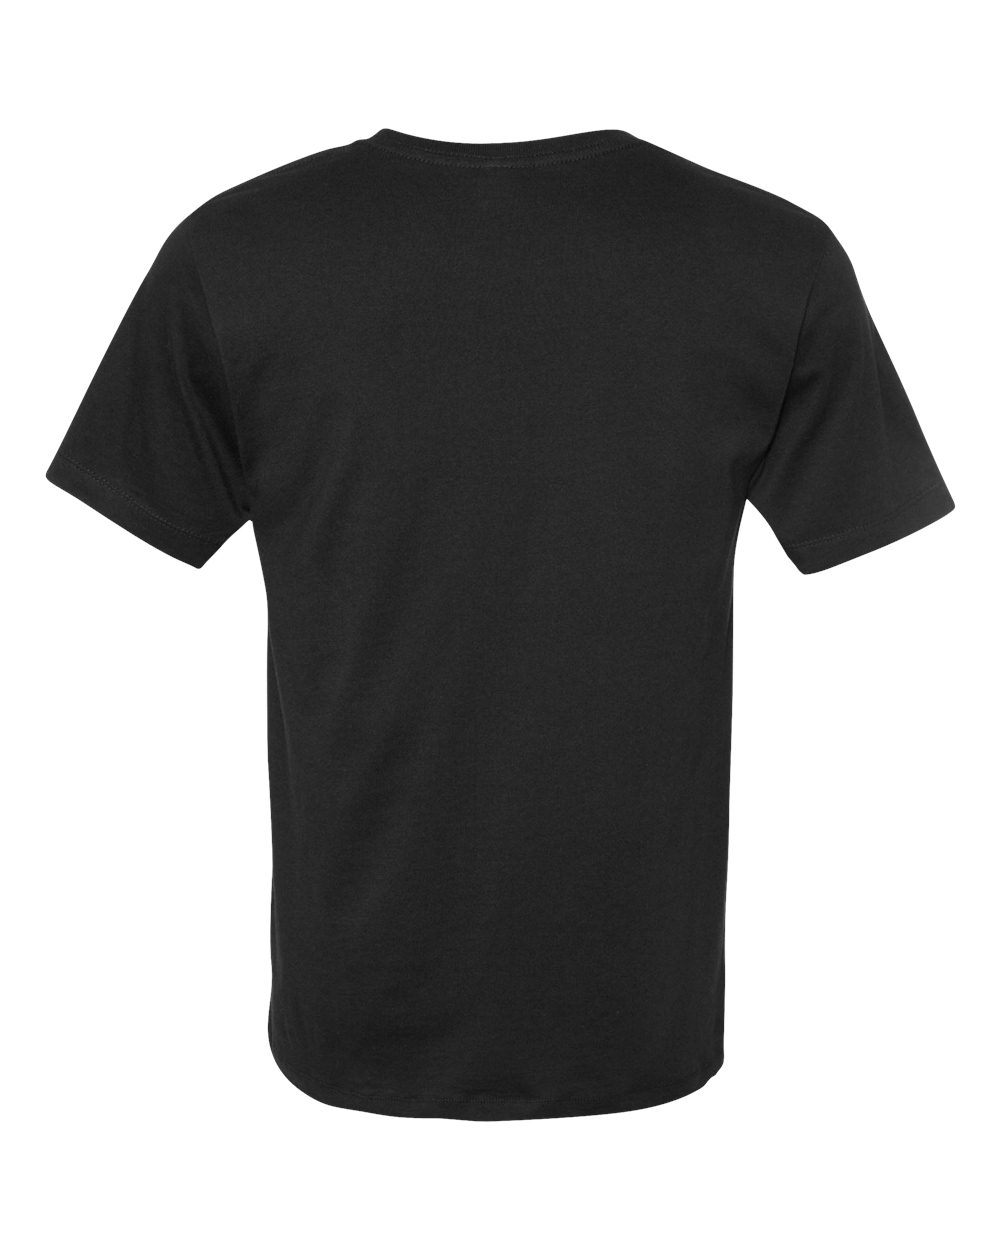 Download Alternative Mens Ringspun Jersey Go-To Tee Shirt 1070 up to 3XL | eBay